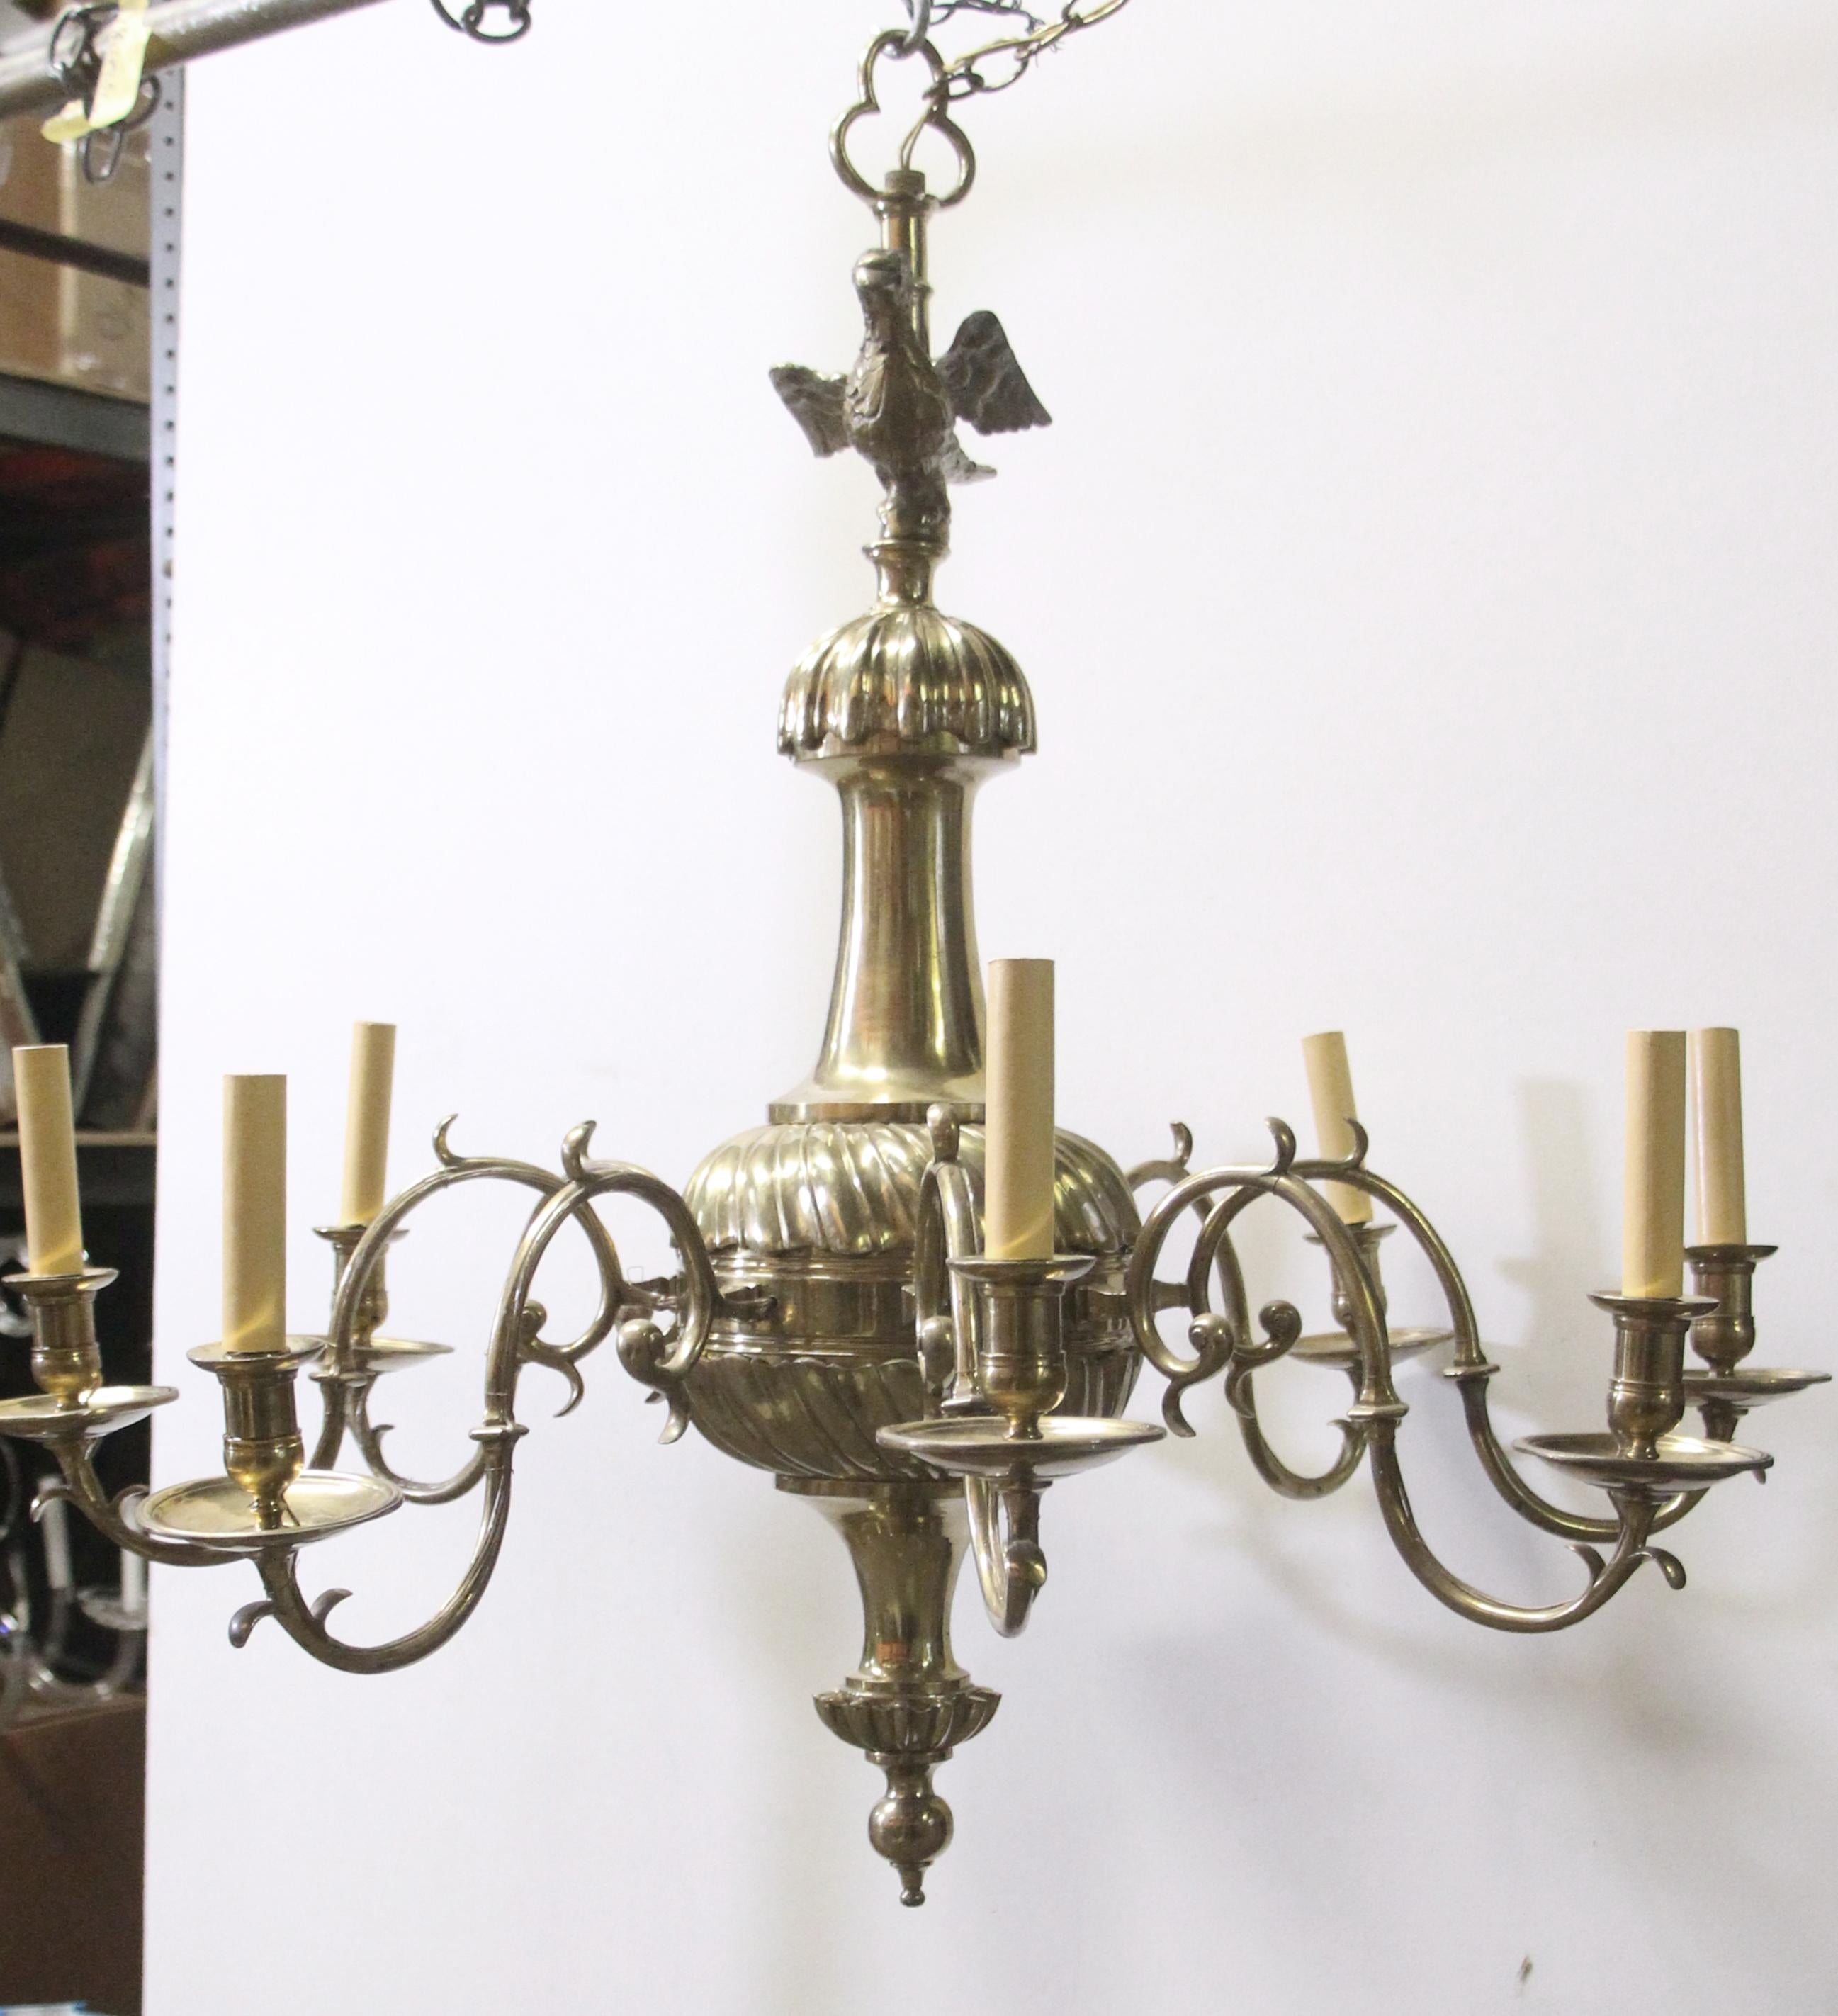 American Early 1900s Brass 8-Arm Chandelier from NYC Stock Exchange w/ Eagle Finial